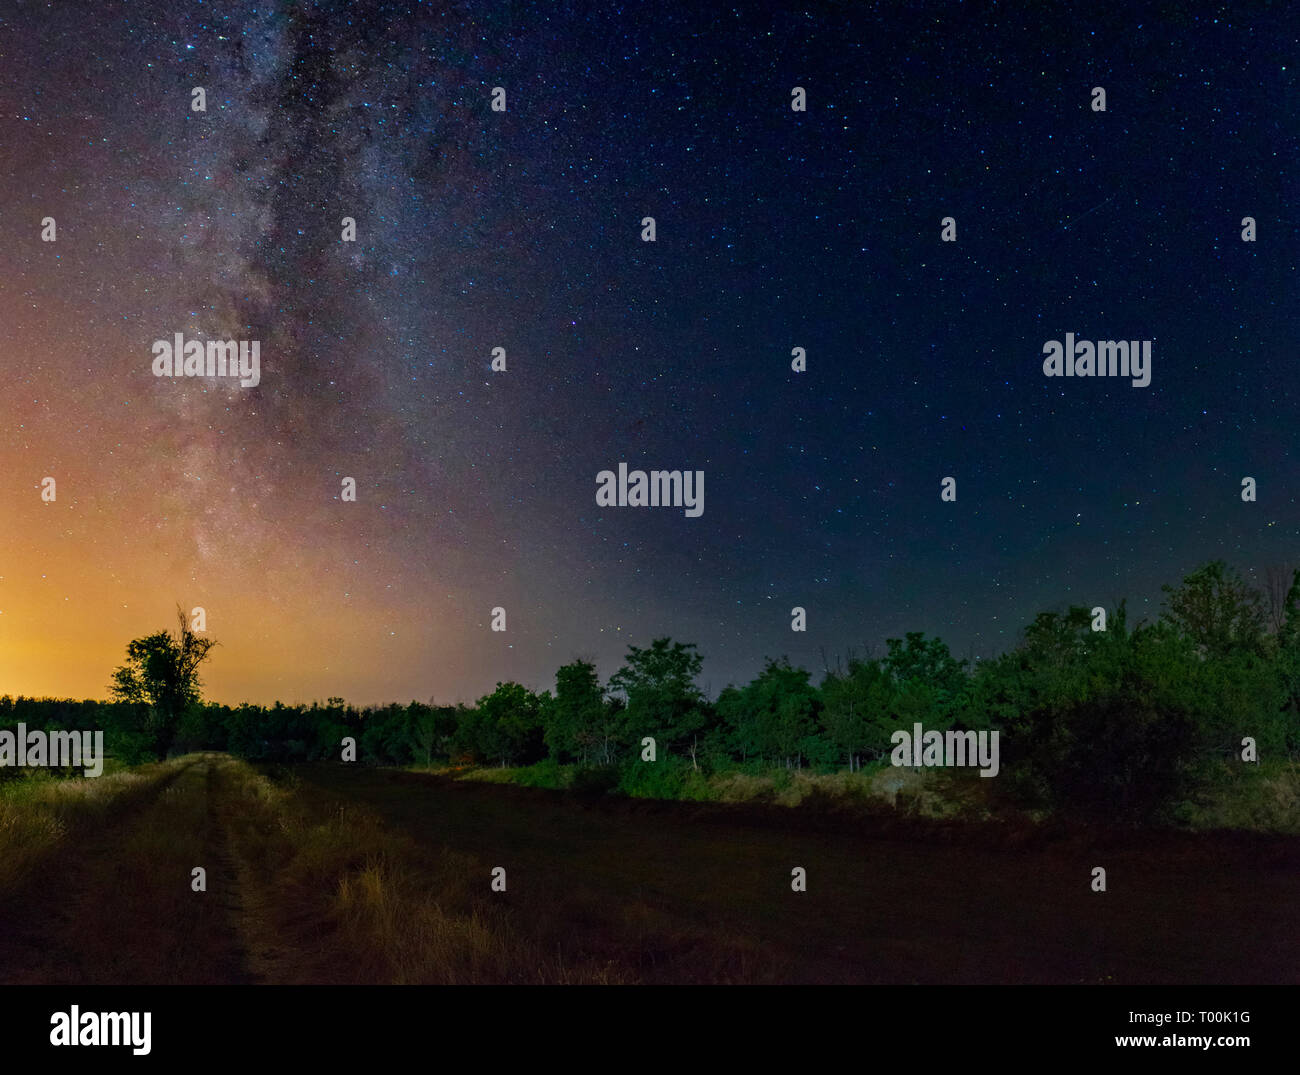 Awesome panoramic night landscape under the Milky Way galaxy and starry sky in Krivoy Rog, Dnipropetrovsk region, Ukraine Stock Photo